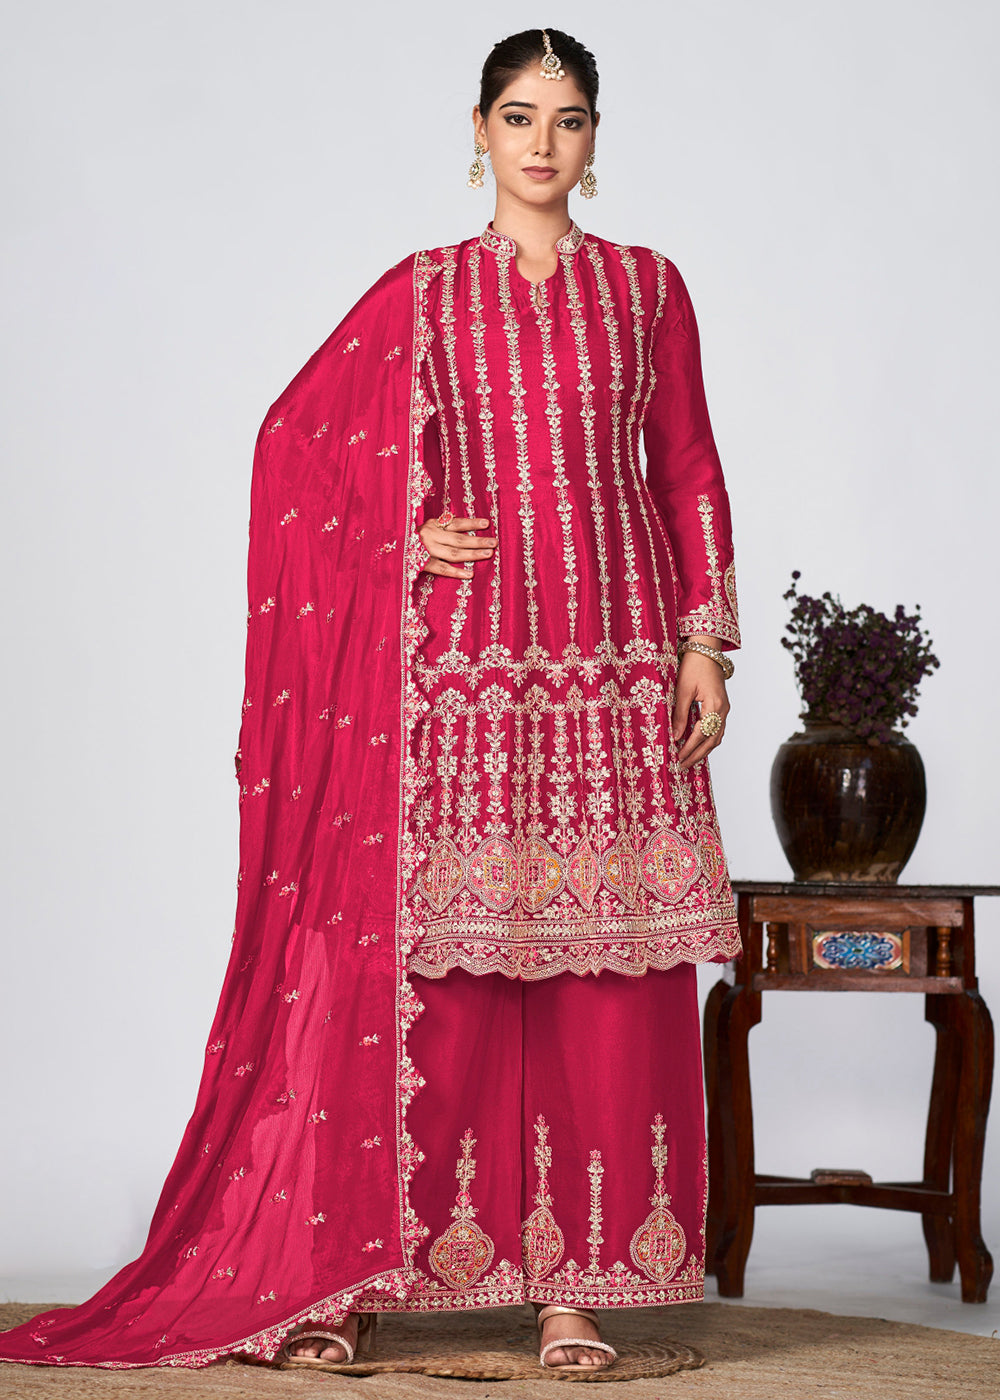 Buy Now Pink Heavy Chinnon Embroidered Festive Palazzo Suit Online in USA, UK, Canada, Germany, Australia & Worldwide at Empress Clothing.